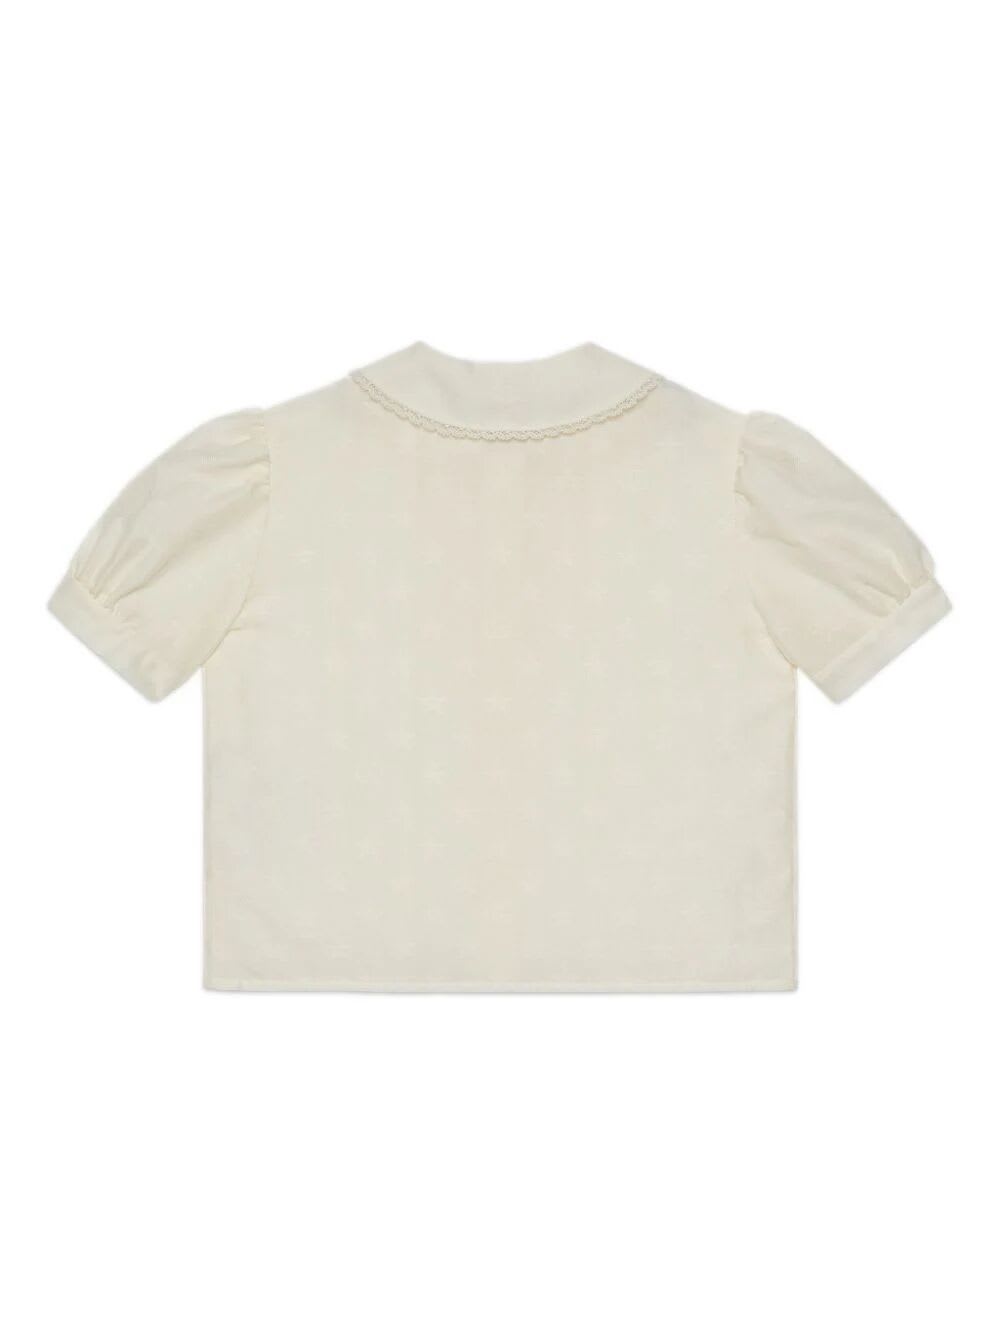 Shop Gucci Shirt Multistar Cotton Jaquard In Ivory